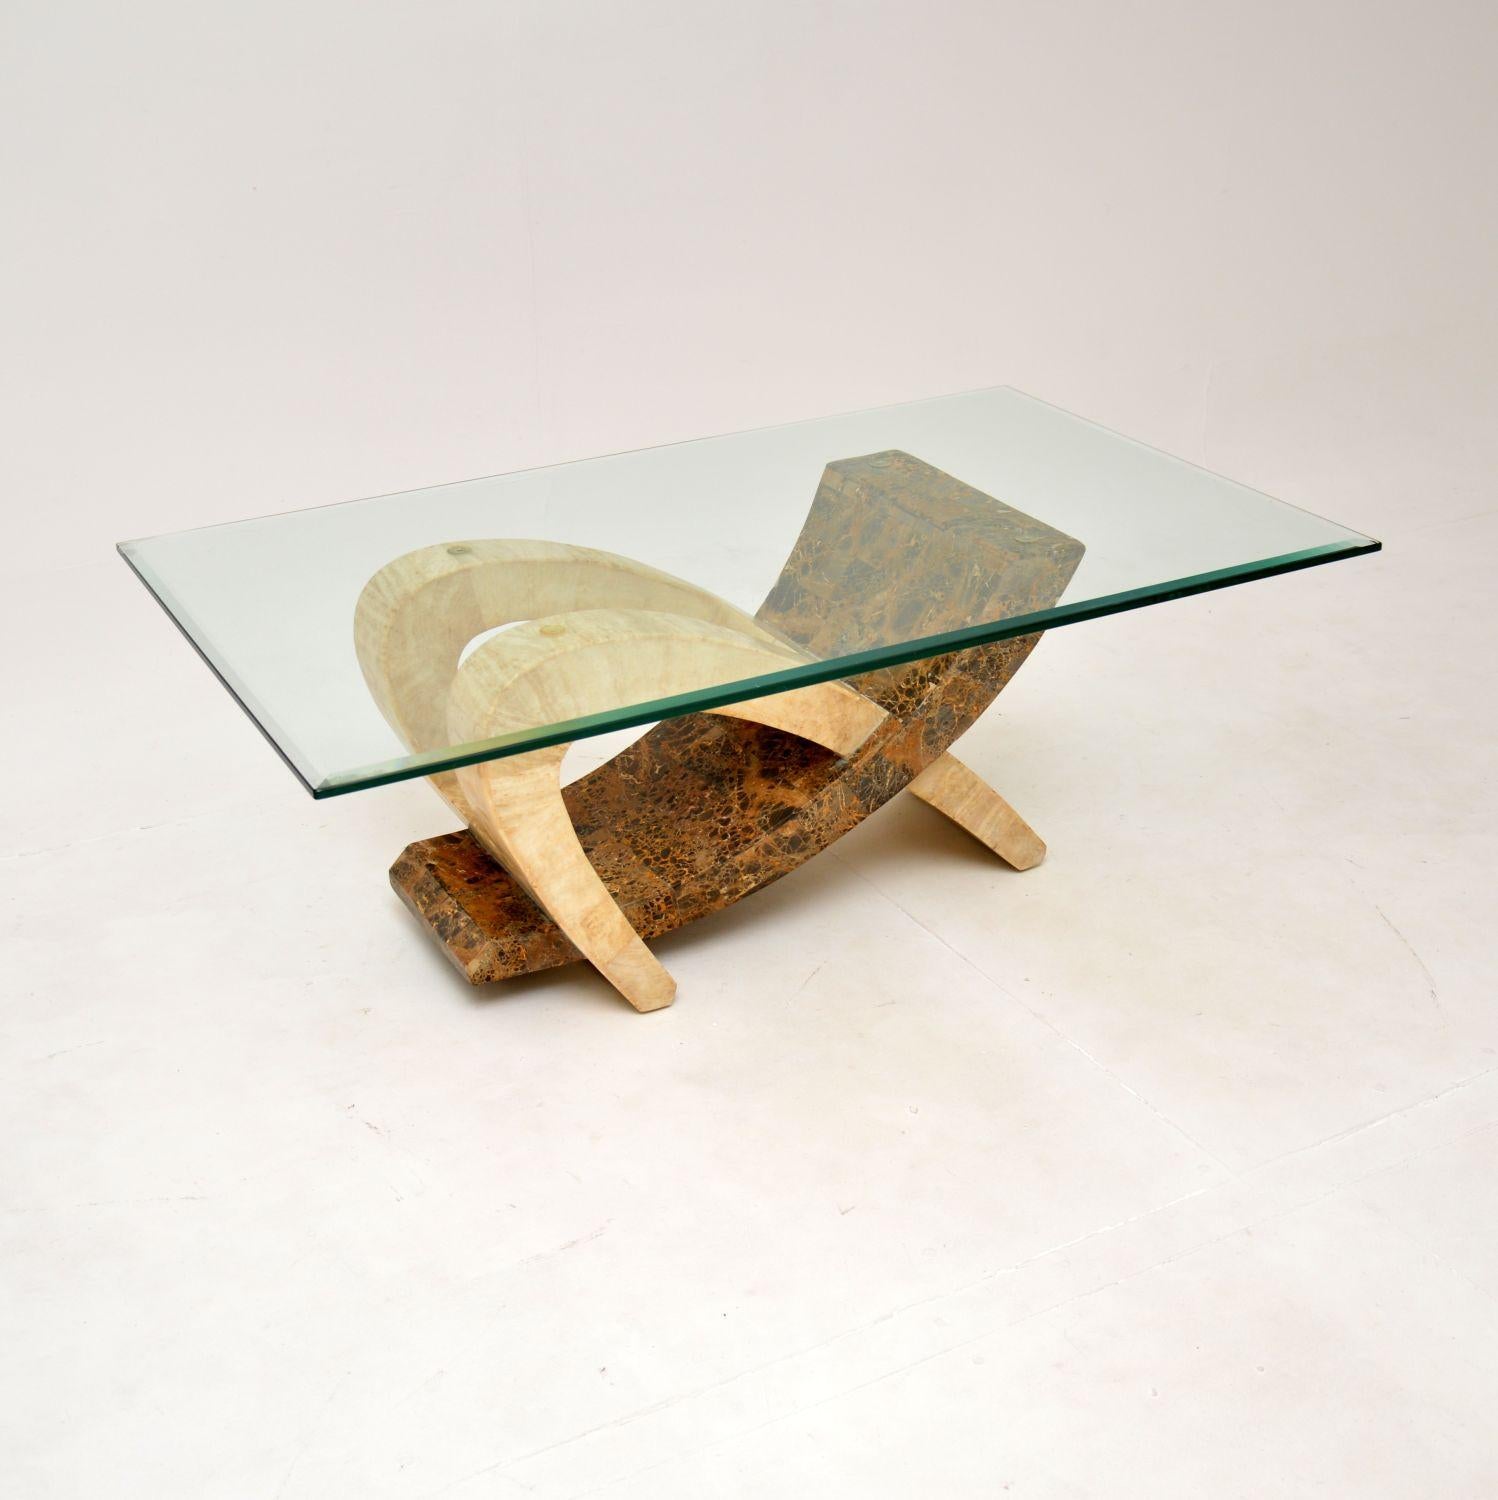 A very stylish and extremely well made vintage tiled marble coffee table with a glass top. This was made in Italy, it dates from around the 1970-80’s.

It is of superb quality, the base has a very interesting shape and is constructed from solid wood